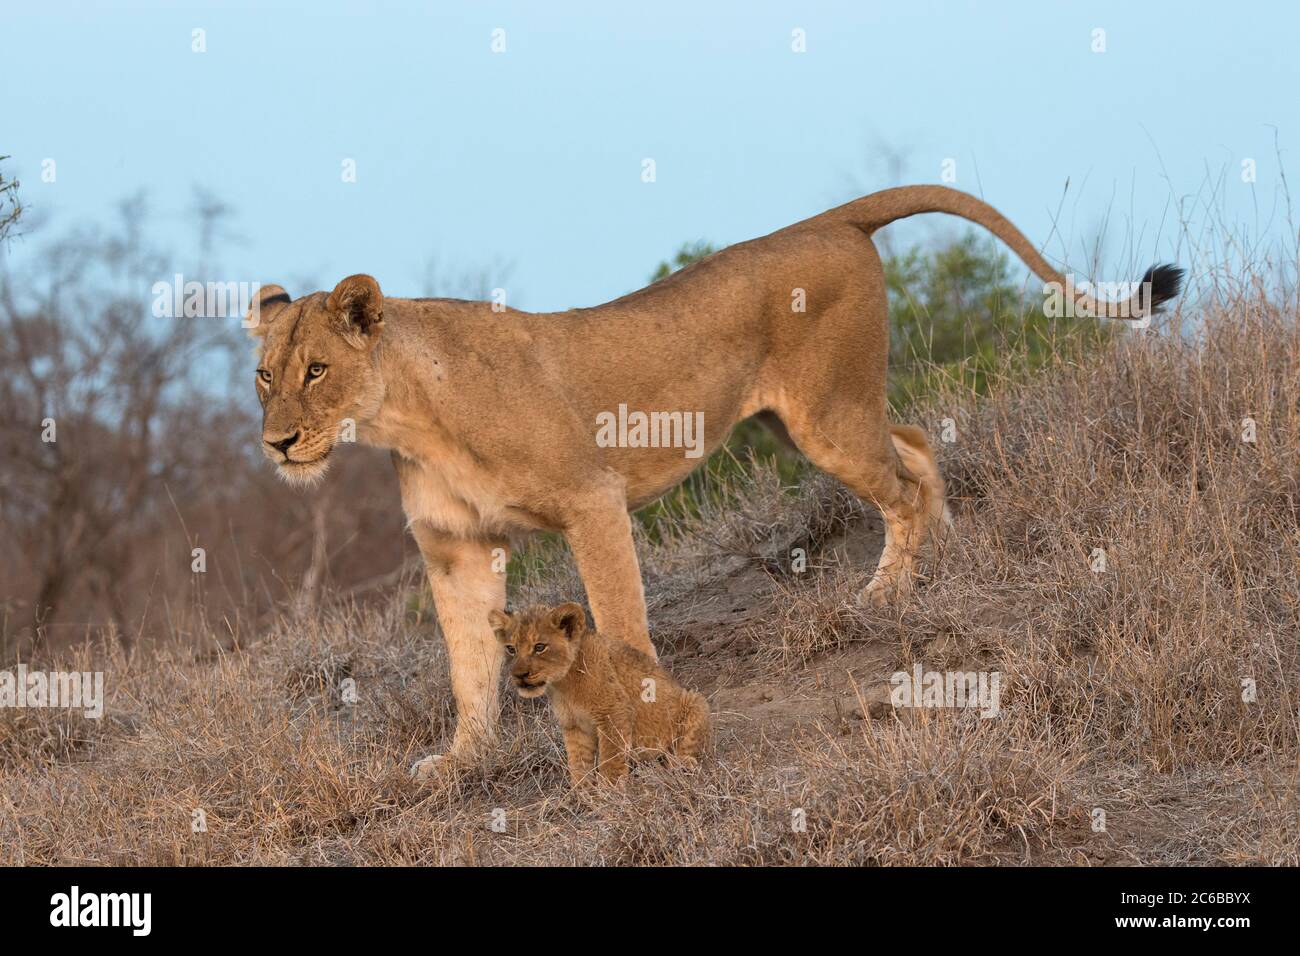 Lioness (Panthera leo) with cub, Elephant Plains, Sabi Sand Game Reserve, South Africa, Africa Stock Photo